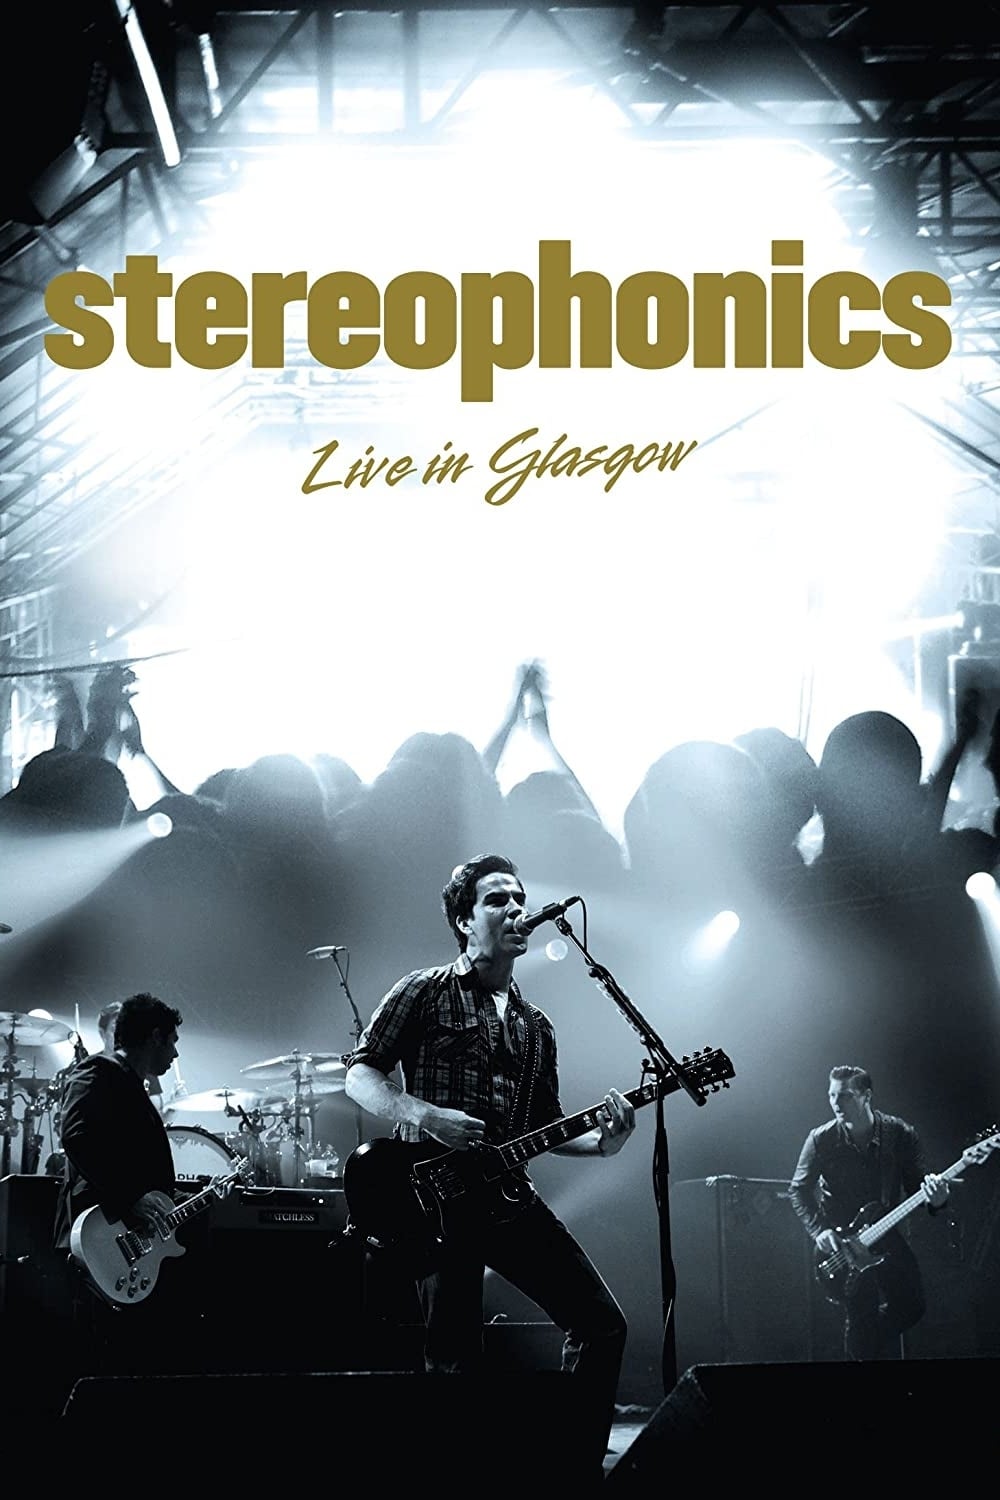 Stereophonics Live In Glasgow